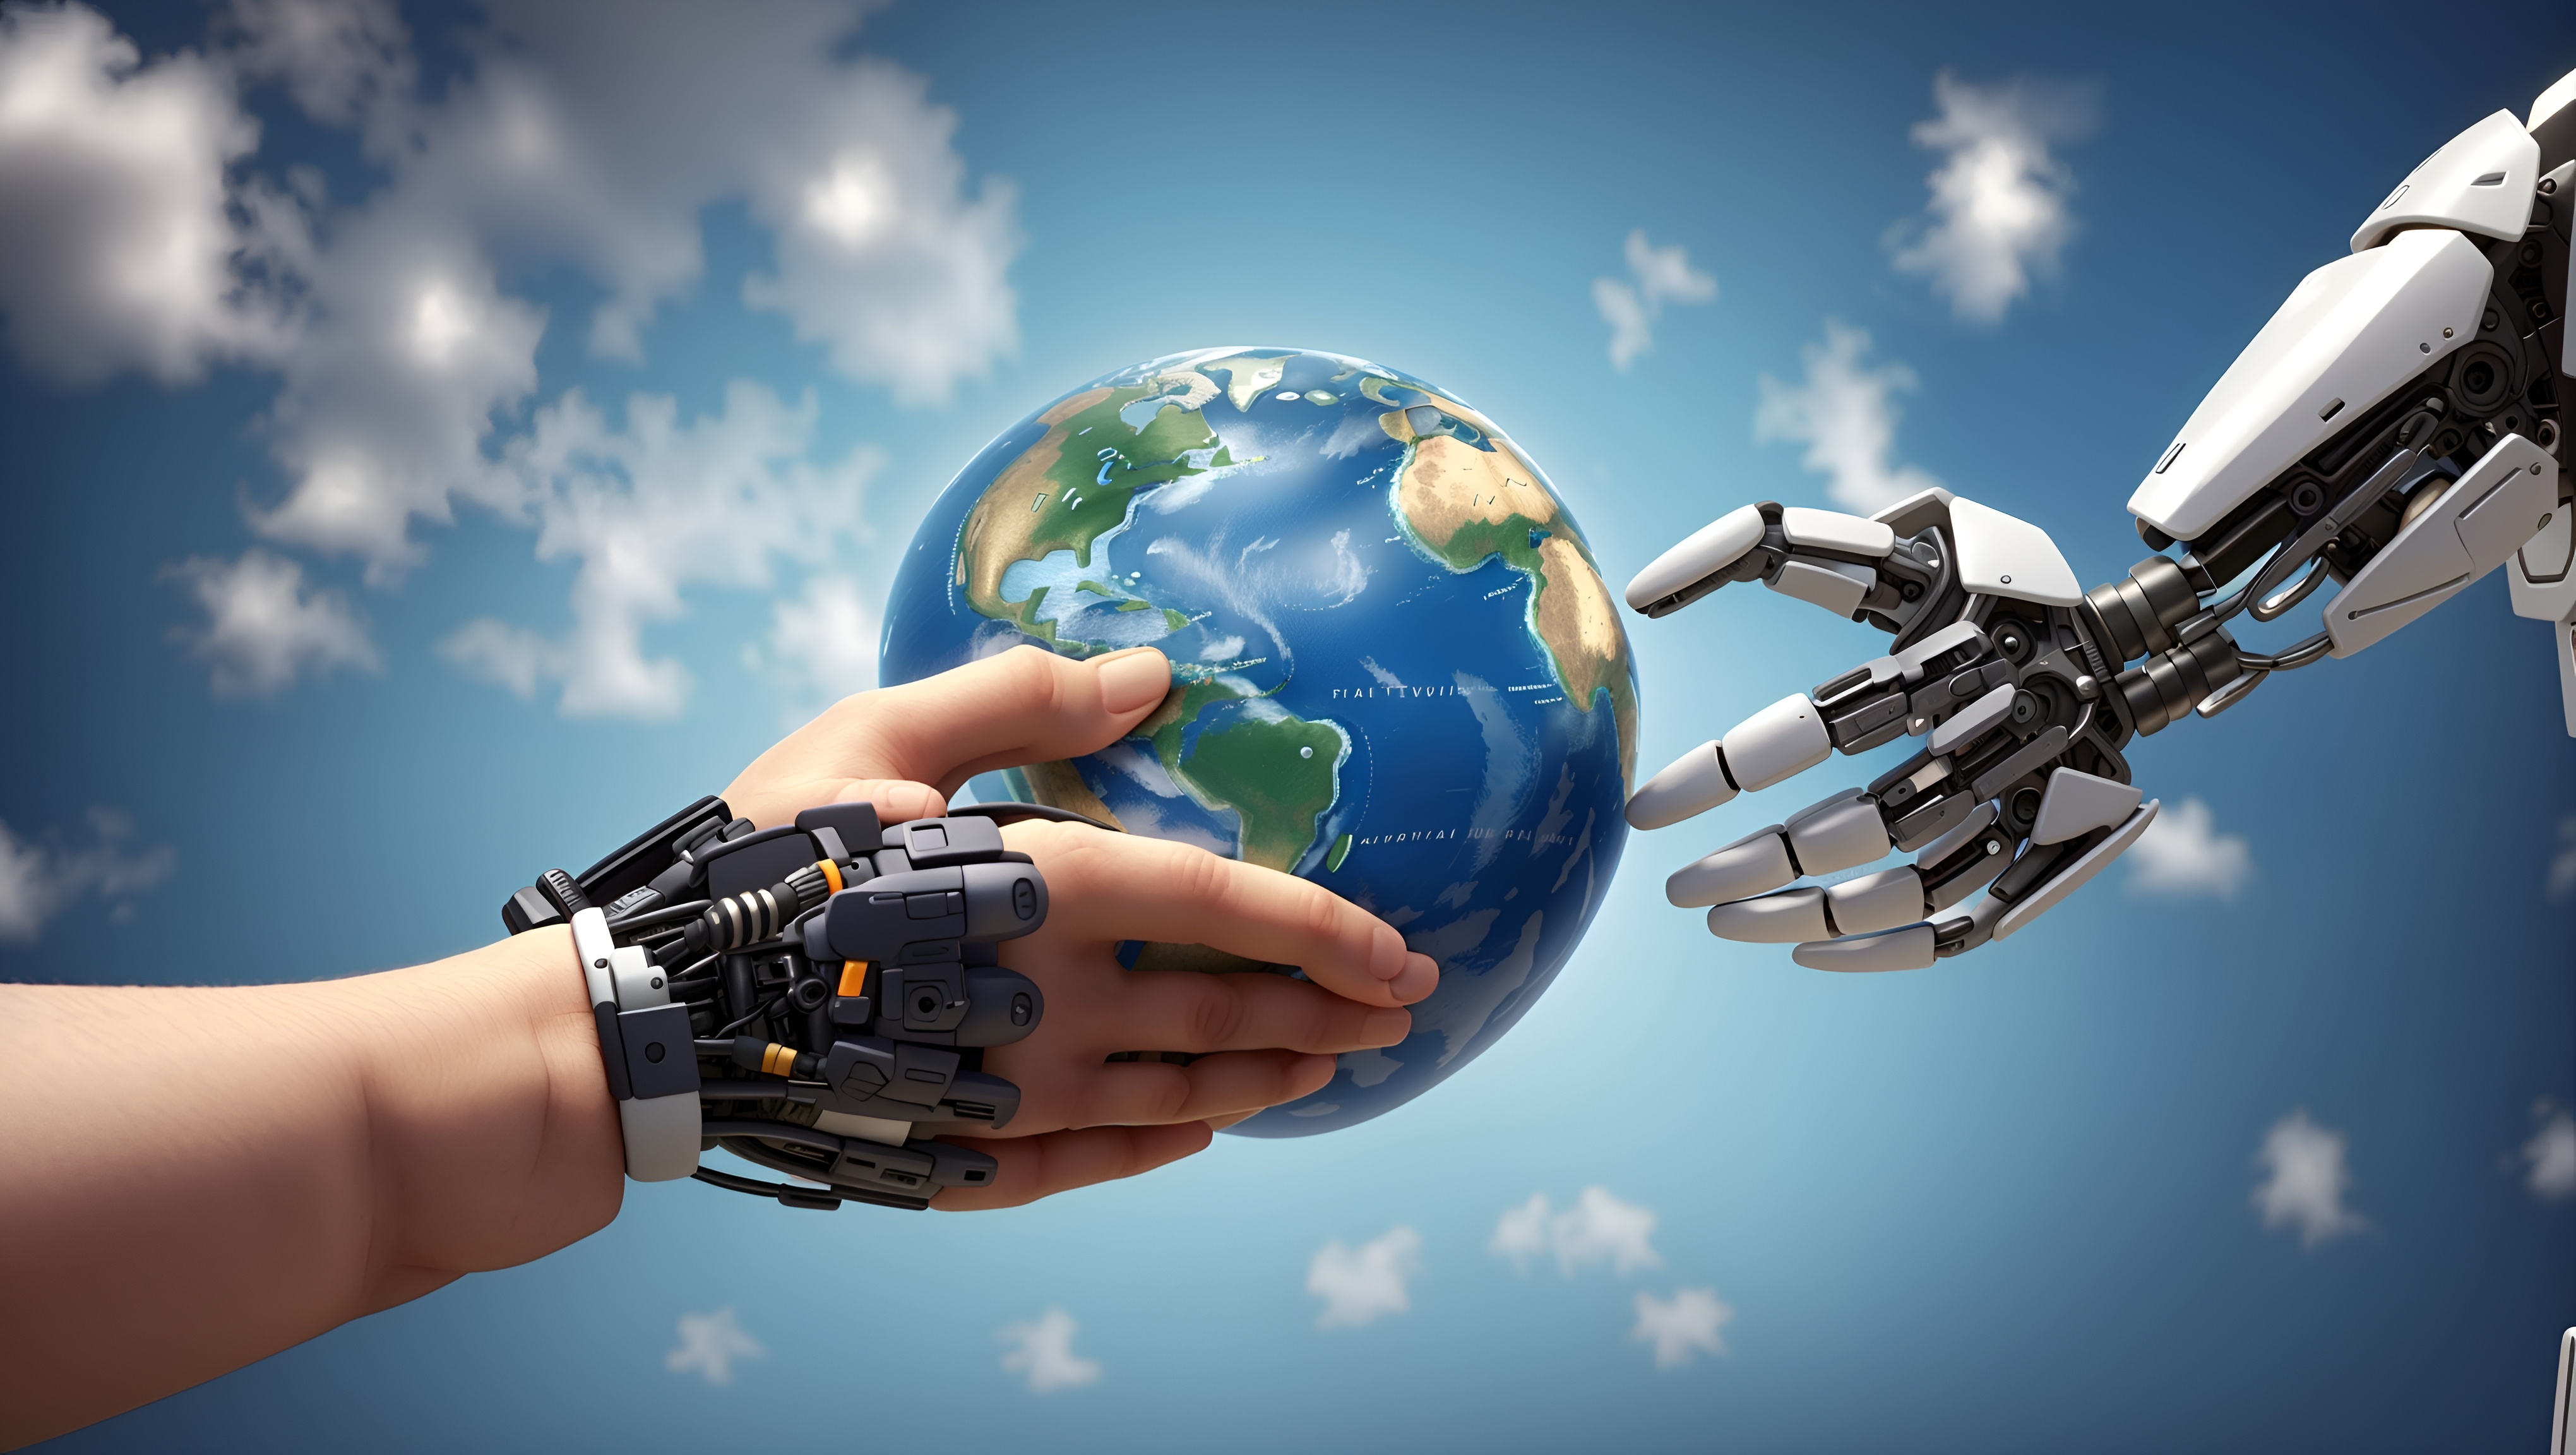 A human hand and a robotic hand meet in a friendly handshake gesture, hovering over a globe that rests between them. This image symbolizes the collaborative partnership between humans and AI, highlighting responsible data collection and cooperation for the greater good.